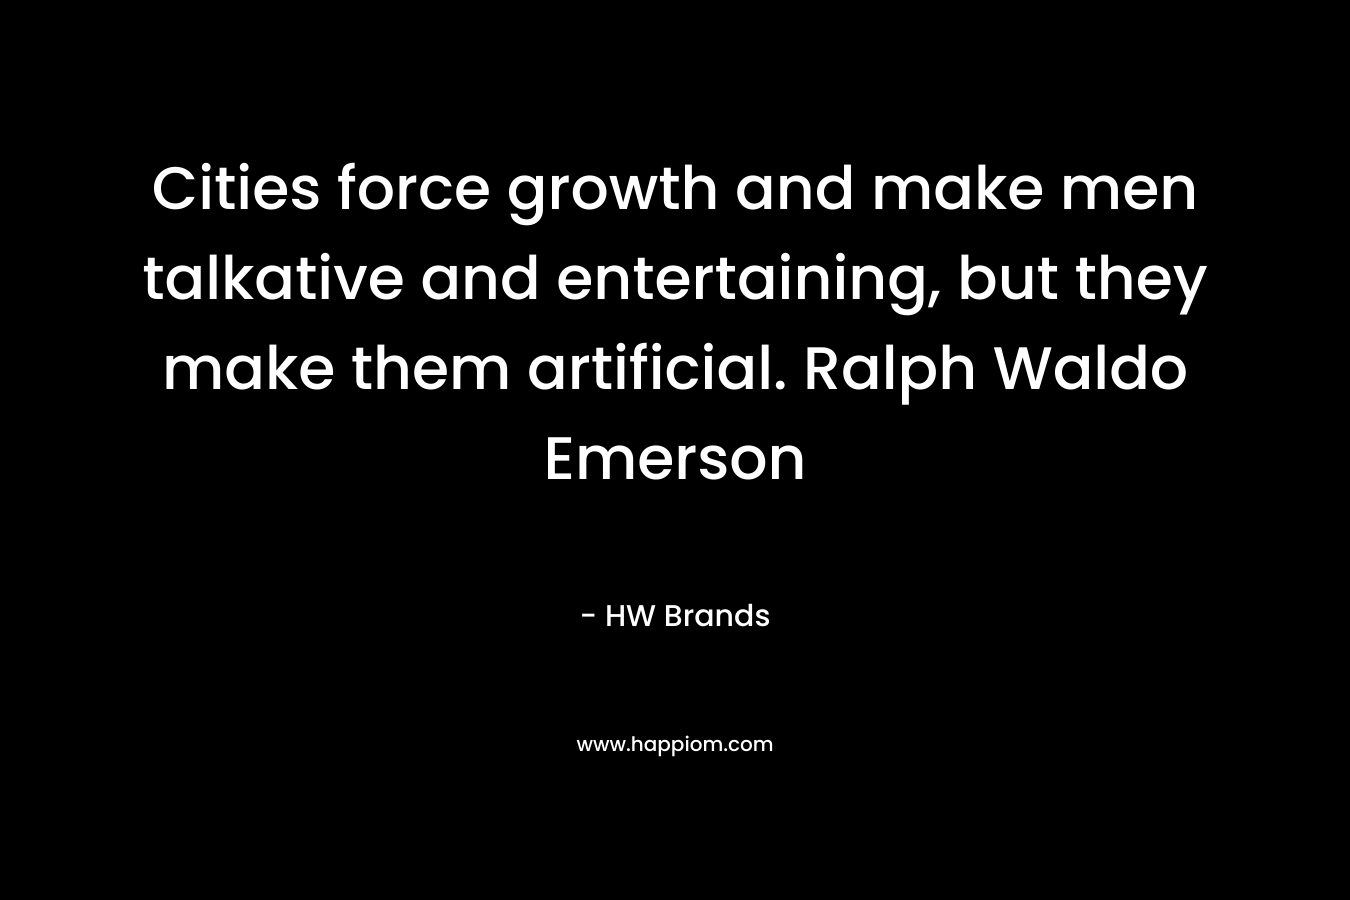 Cities force growth and make men talkative and entertaining, but they make them artificial. Ralph Waldo Emerson